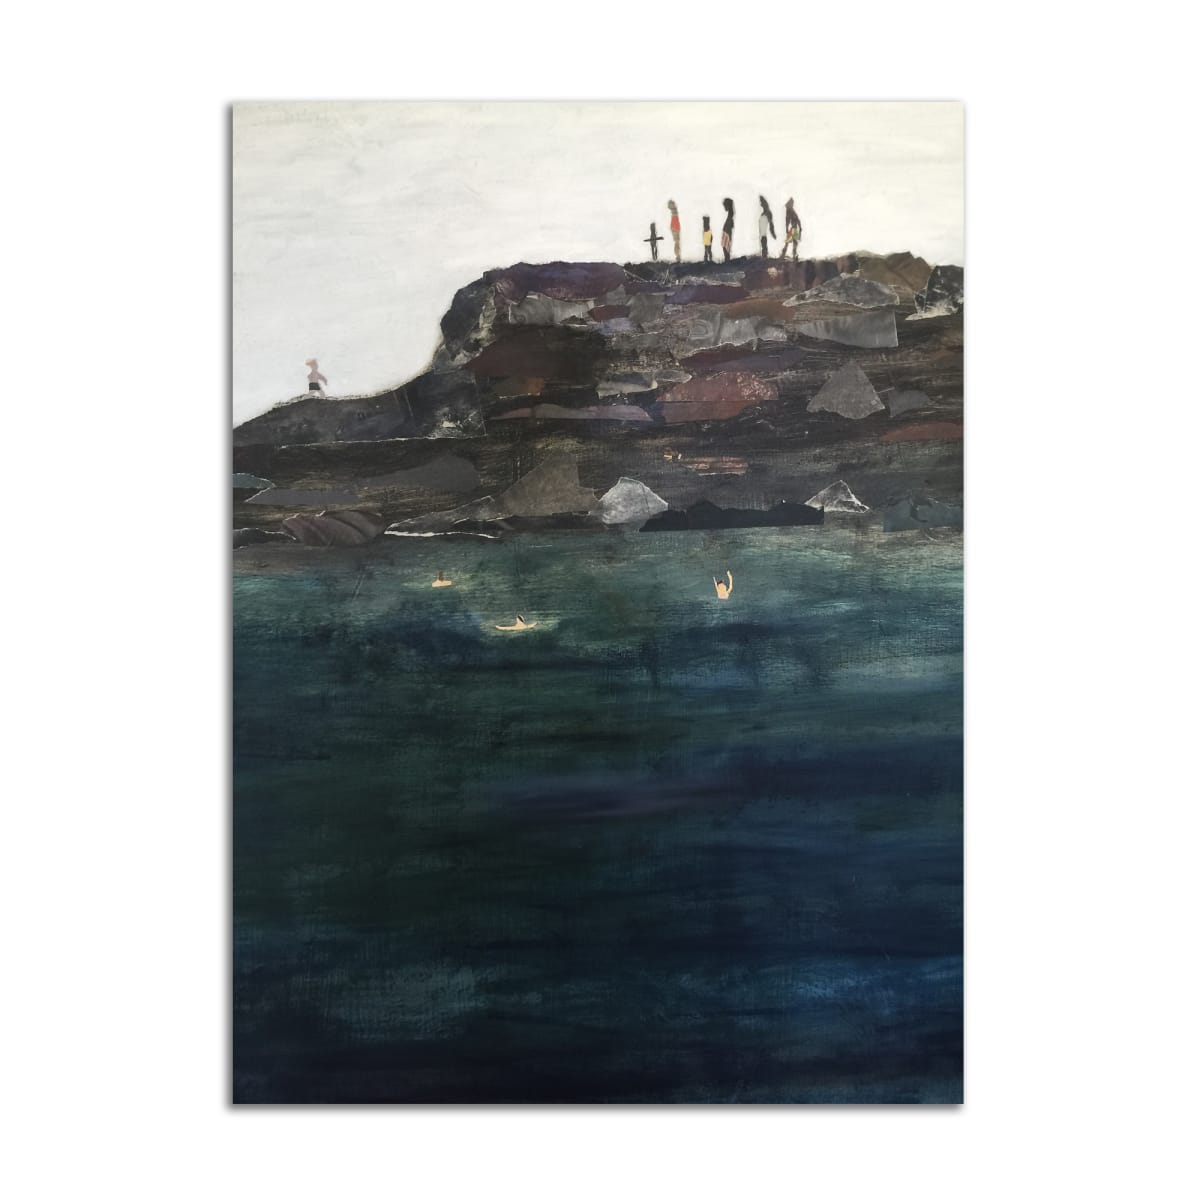 Cliff Divers by Rosie Winstead 